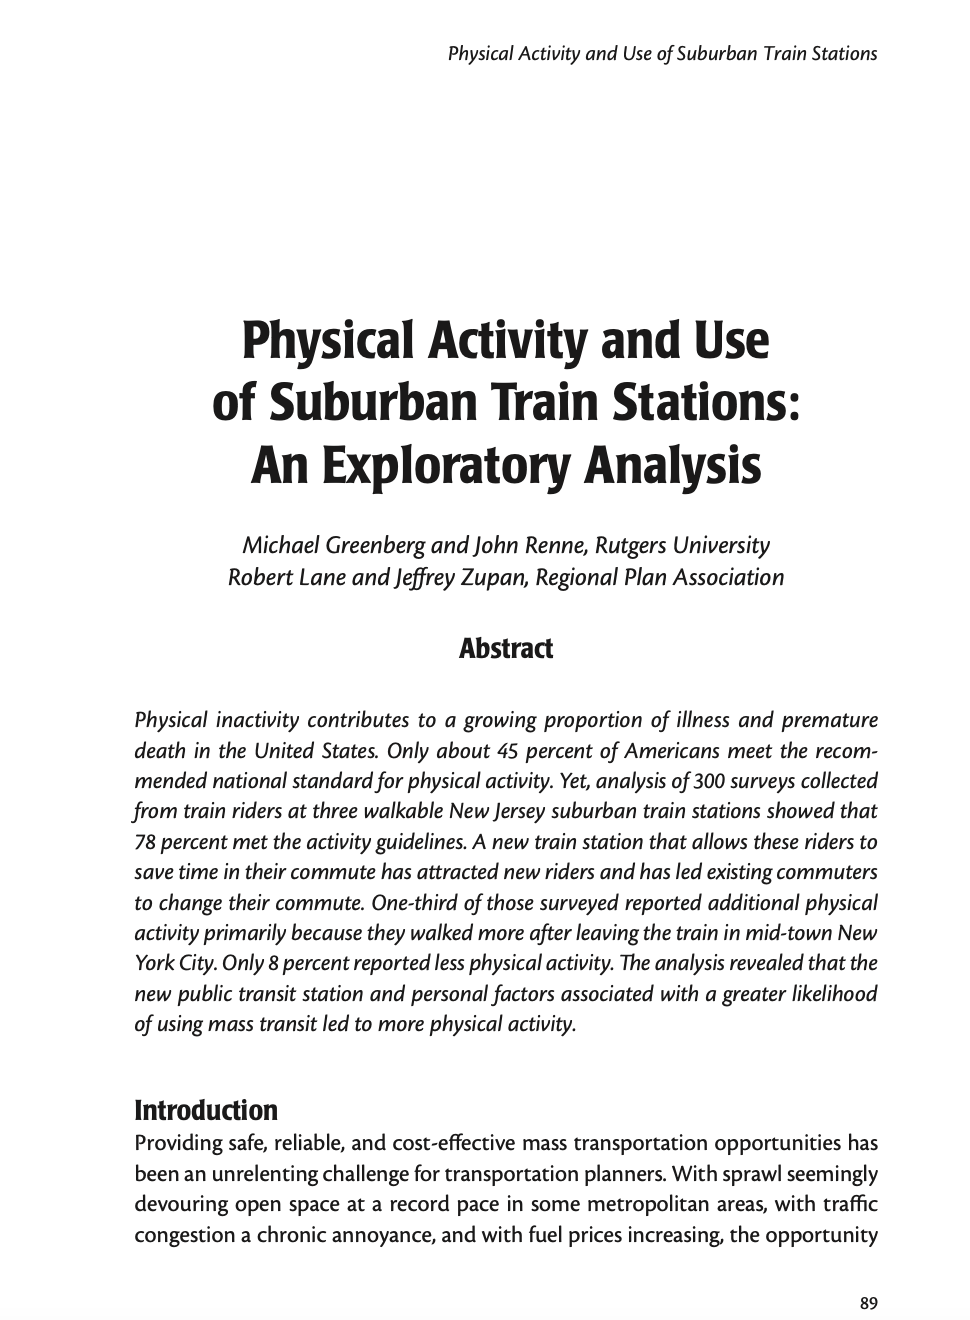 Physical Activity and Use of Suburban Train Stations